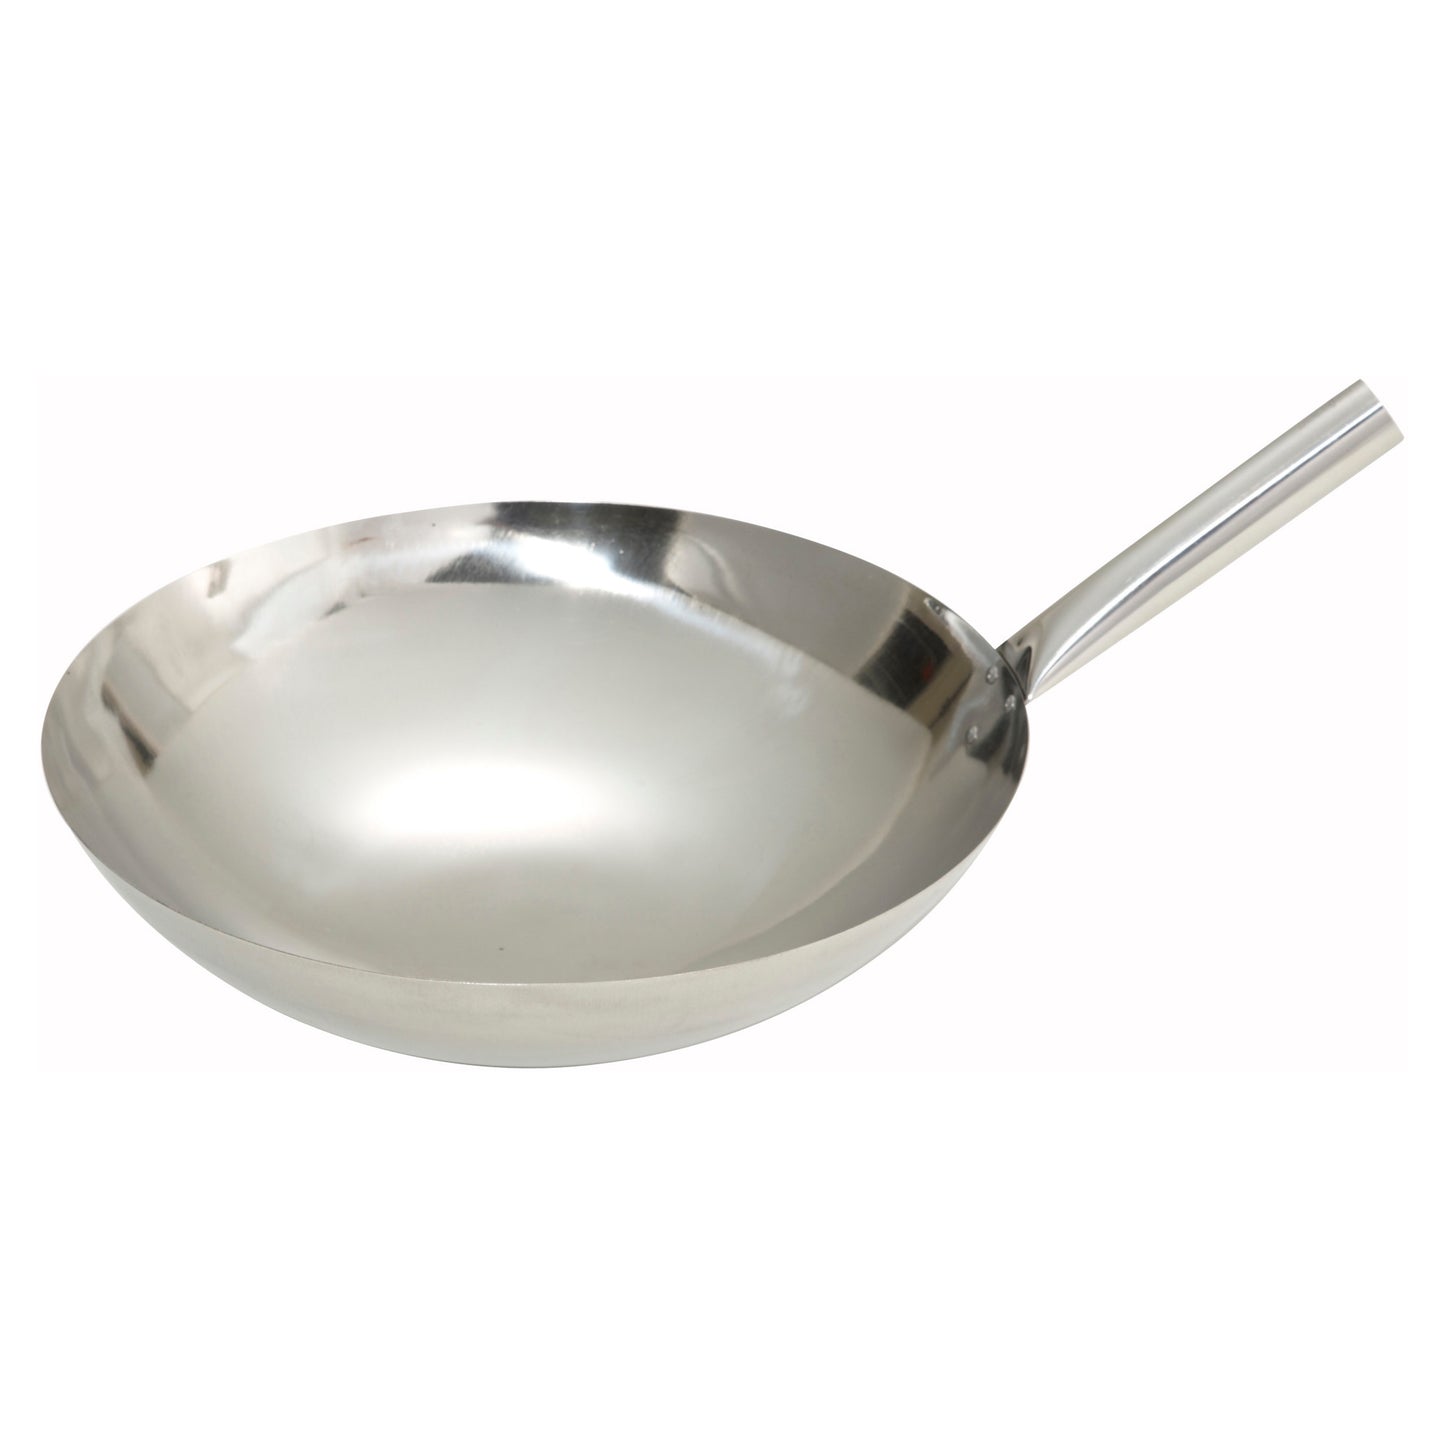 Stainless Steel Chinese Wok - 16", Nailed